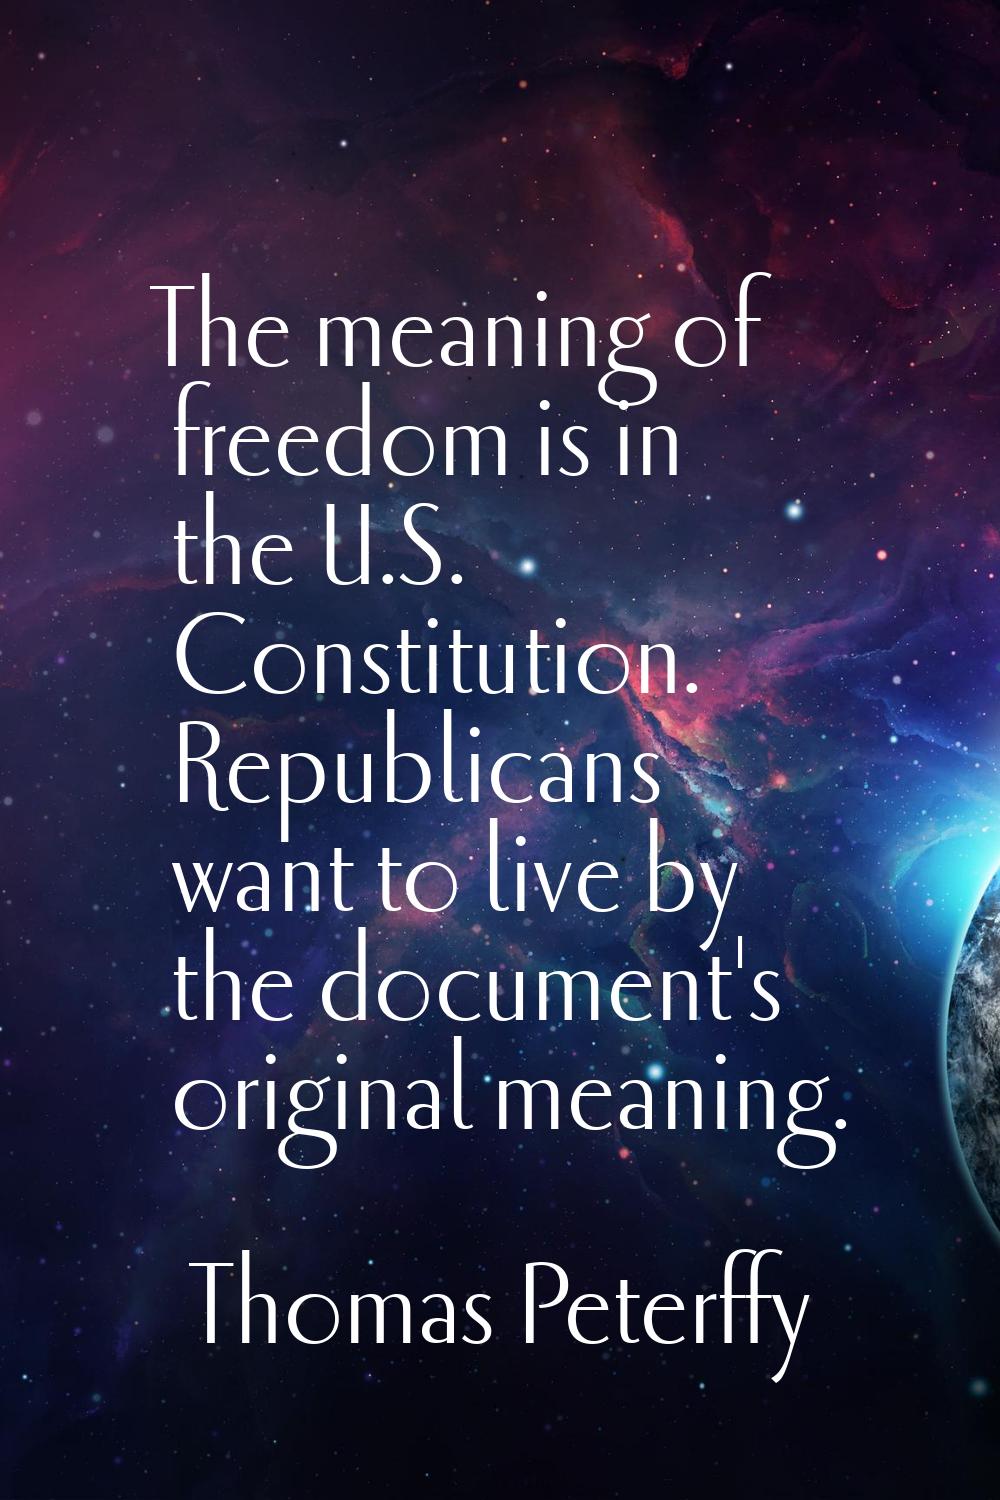 The meaning of freedom is in the U.S. Constitution. Republicans want to live by the document's orig